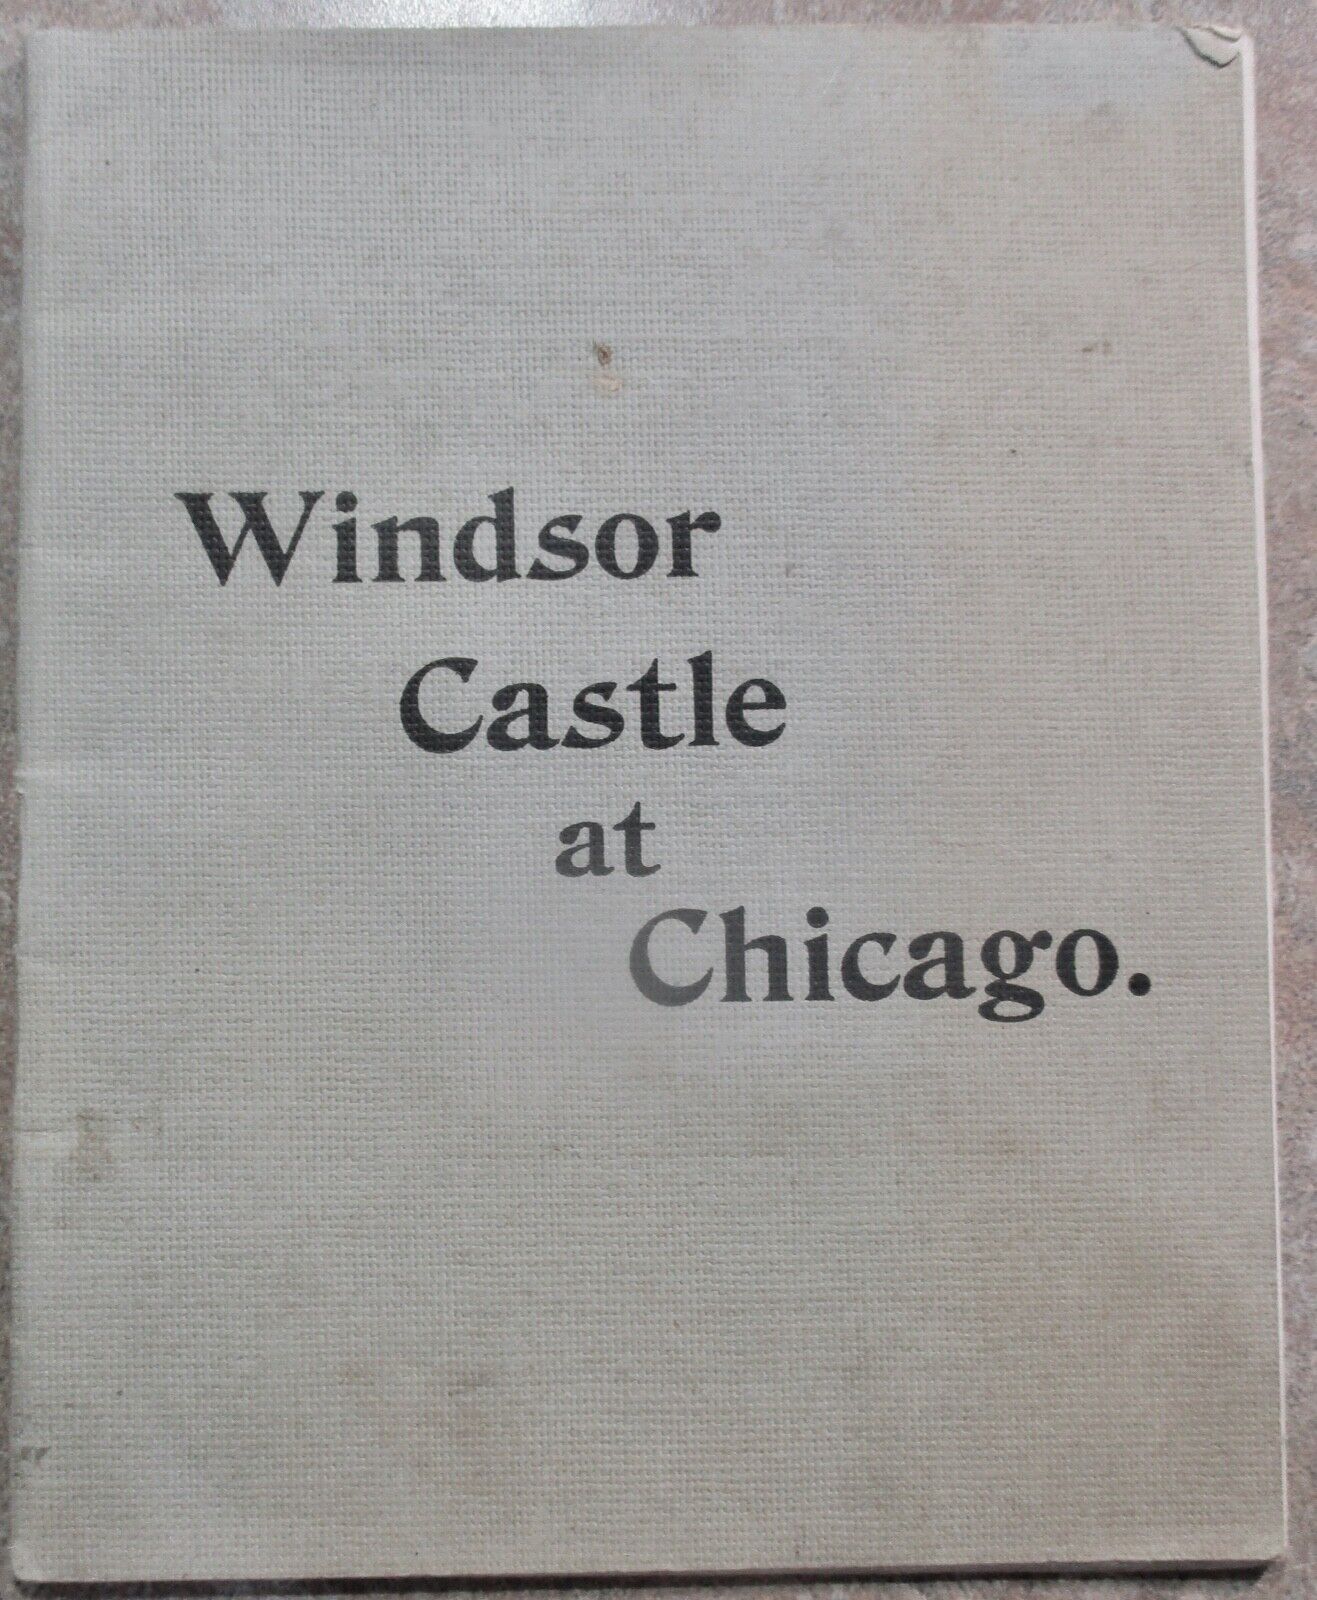 SALE-- SCARCE BOOKLET 'WINDSOR CASTLE AT CHICAGO' HANDOUT AT 1893 COLUMBIAN EXPO